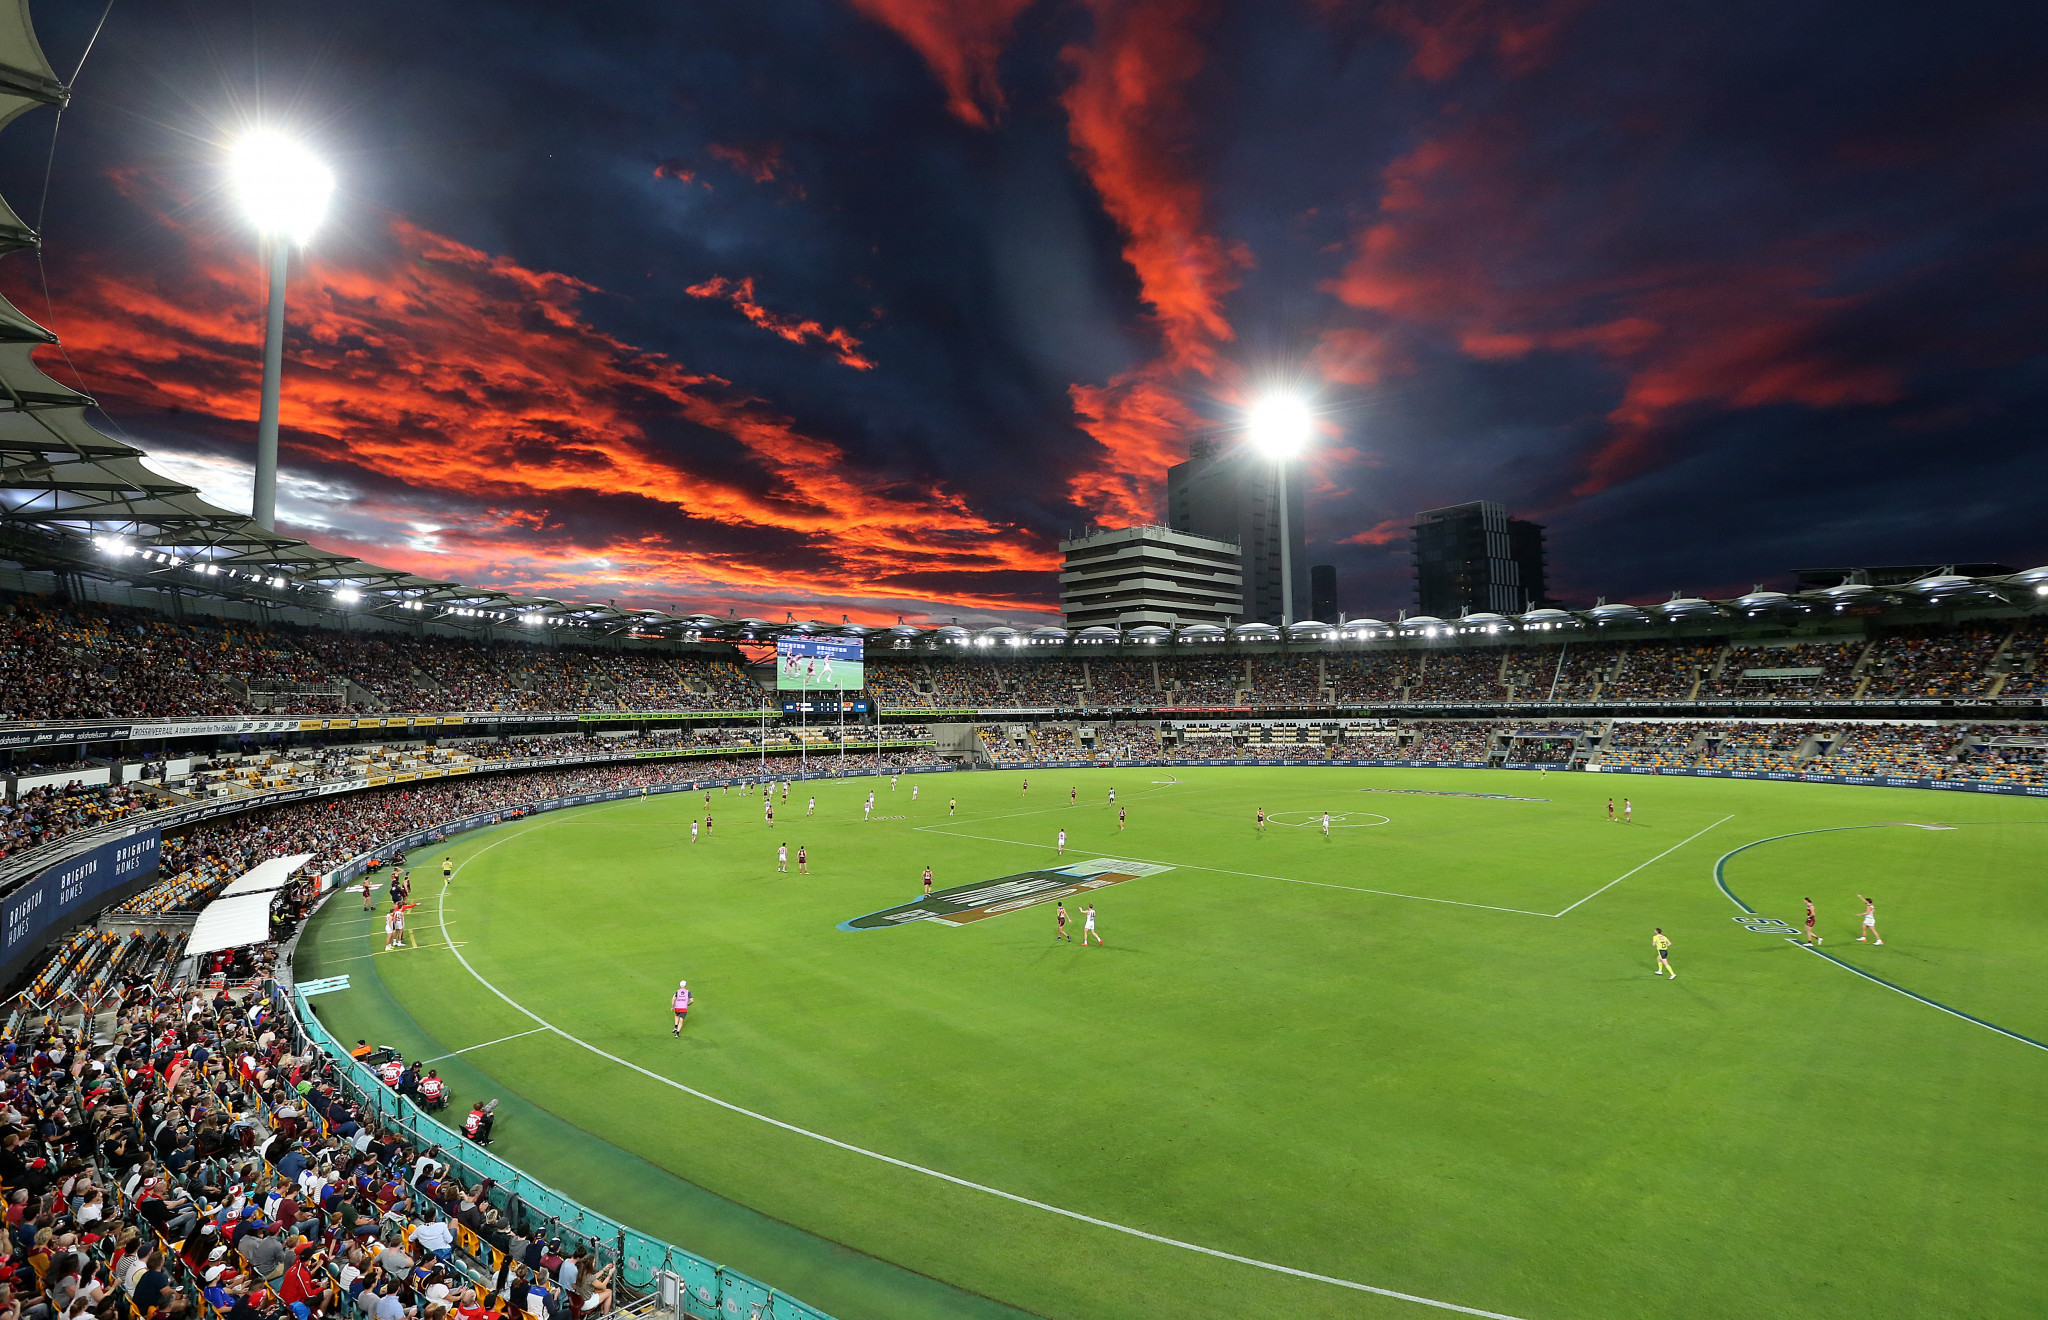 Queensland trials re-usable cups at the Gabba with view to Brisbane 2032 sustainability